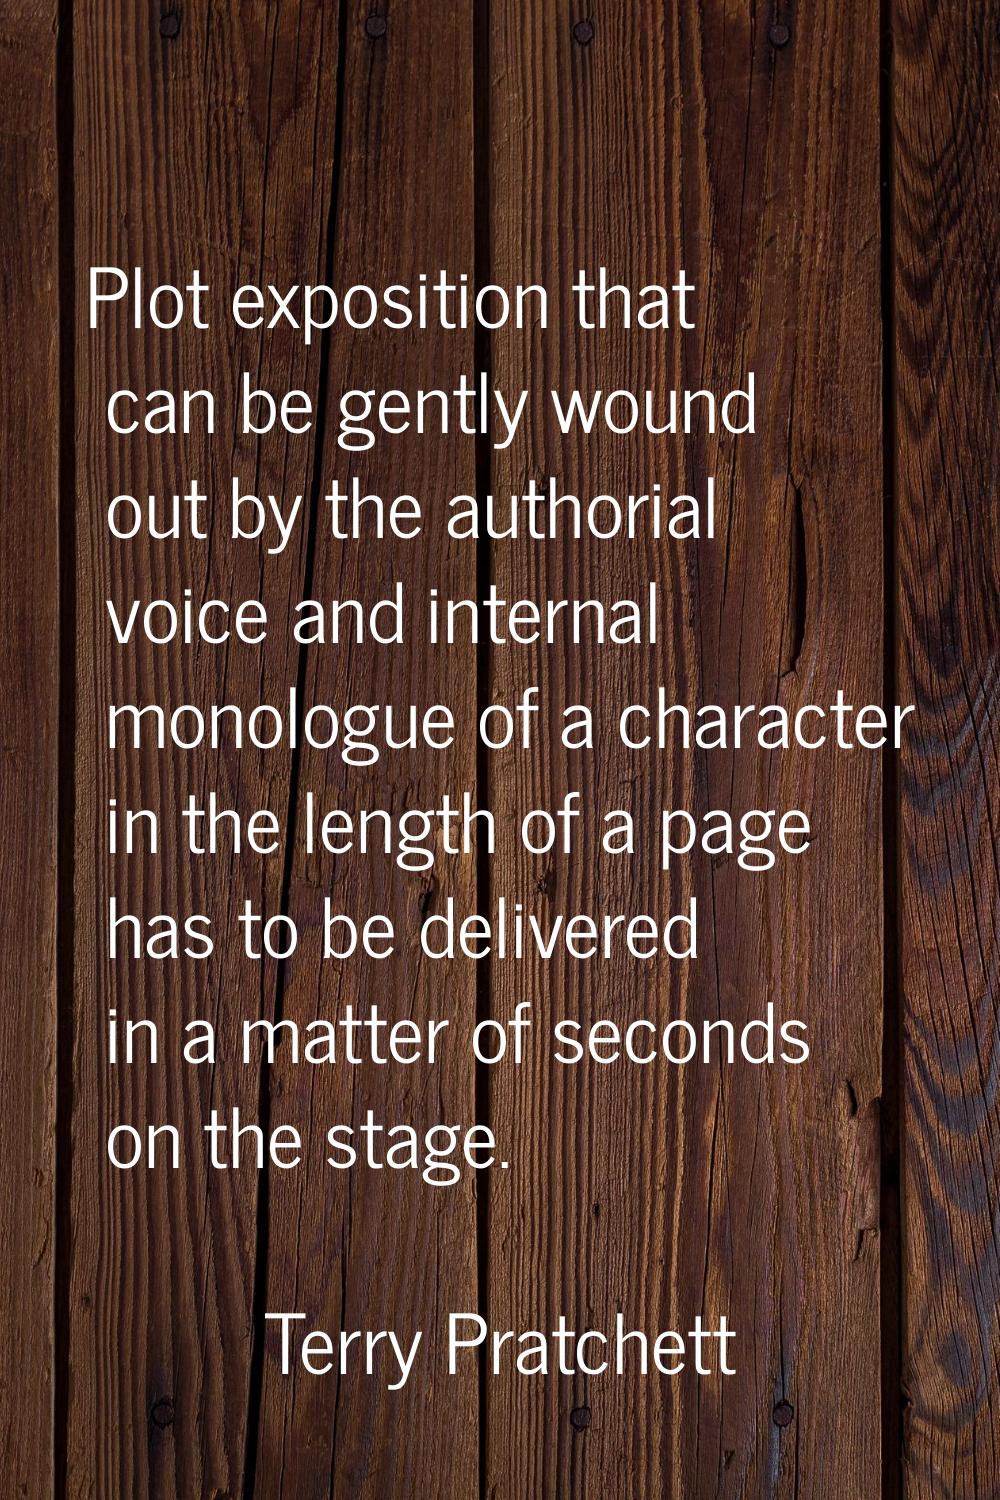 Plot exposition that can be gently wound out by the authorial voice and internal monologue of a cha